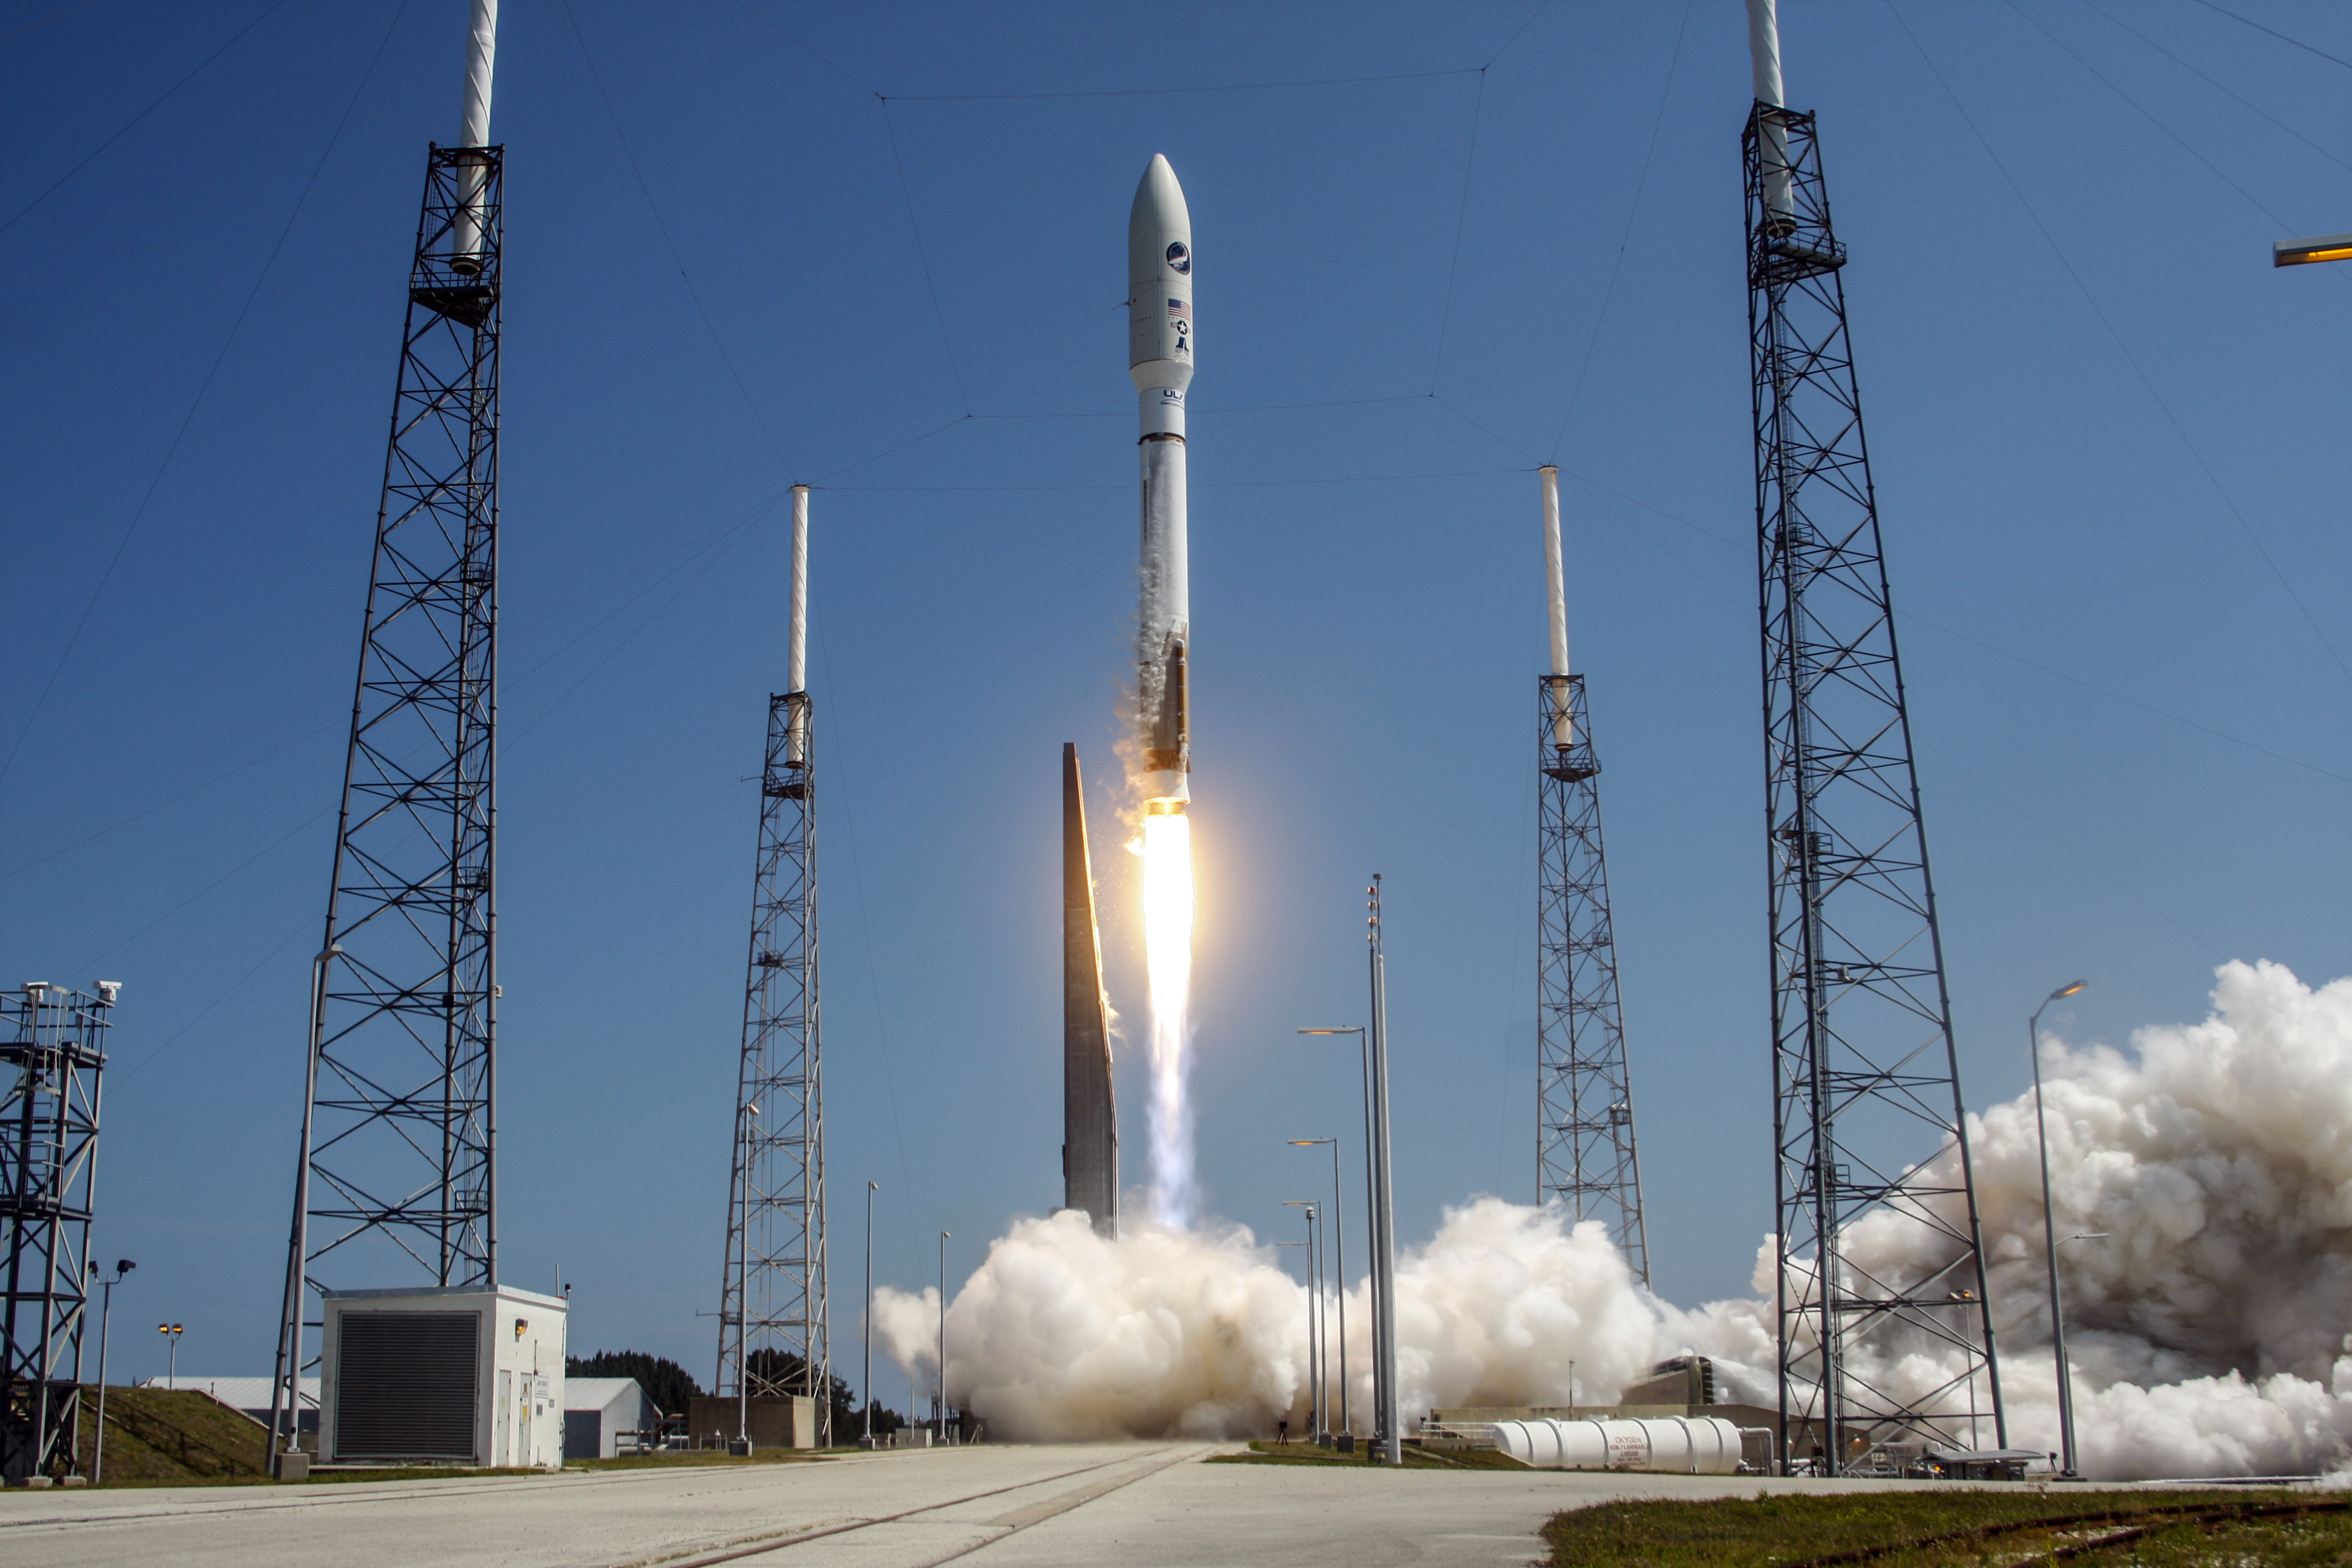  United Launch Alliance (ULA) Atlas V rocket successfully launched the U.S. Air Force X-37B space plane on May 20, 2015. ULA Photo 